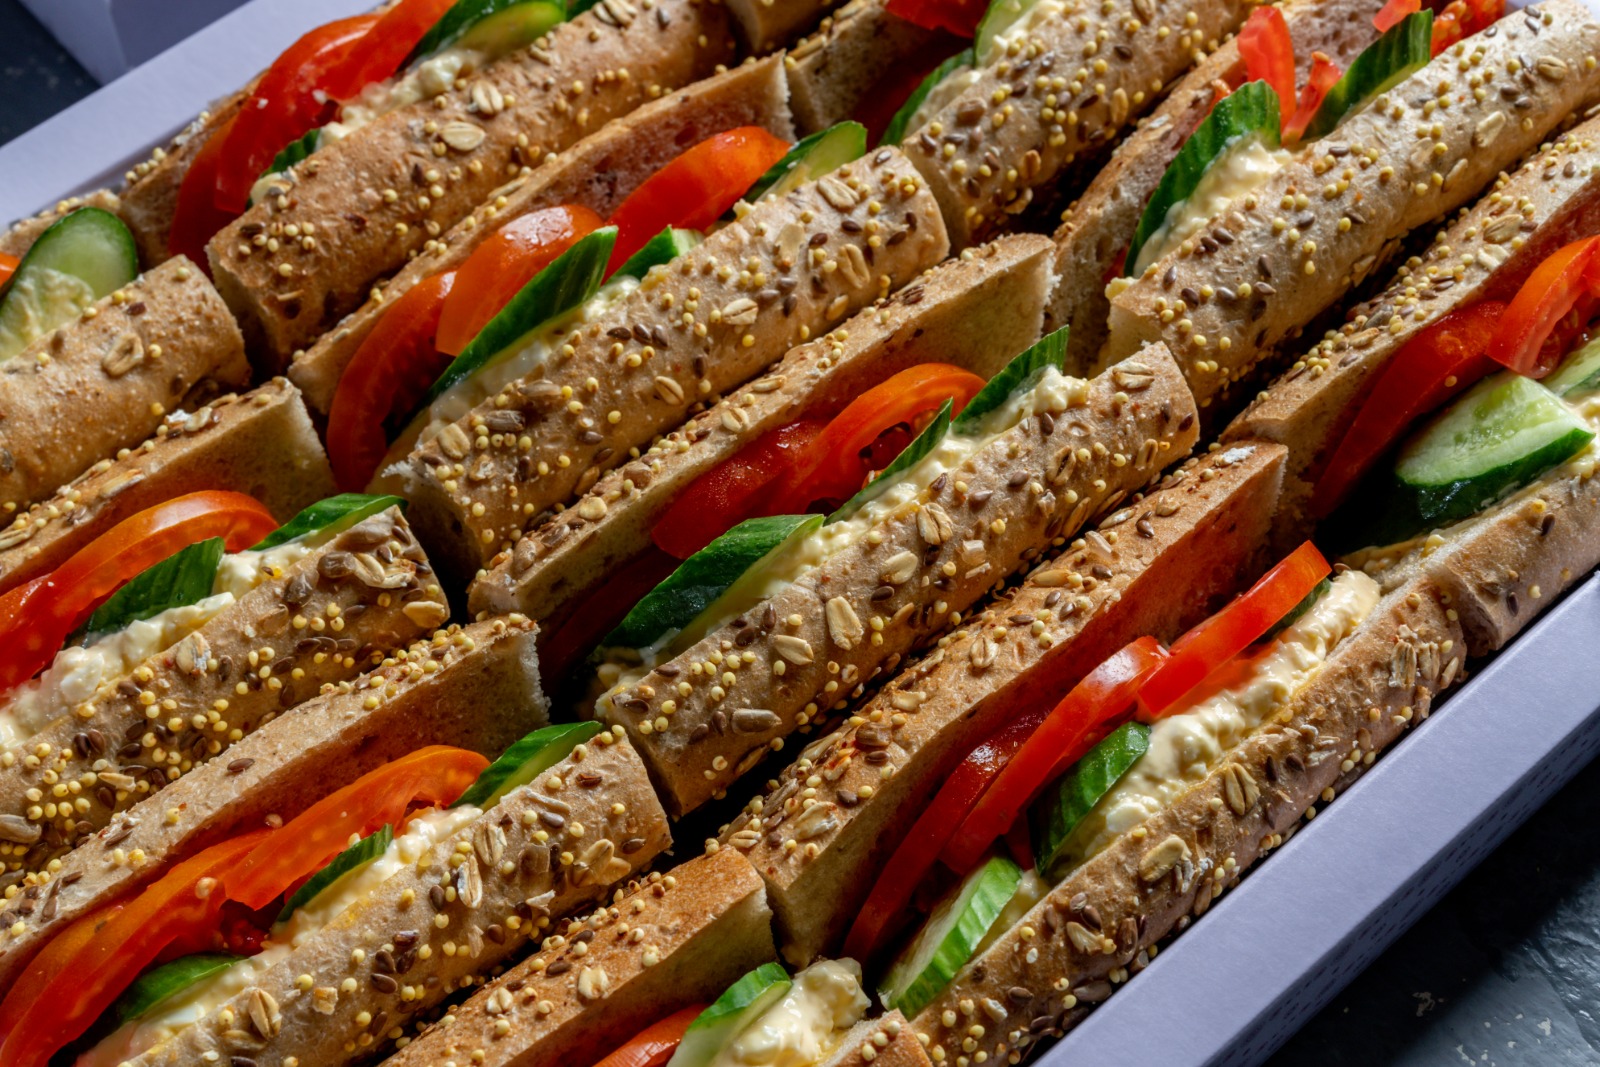 A tray of egg salad and fresh vegetables sandwiches on grains flute